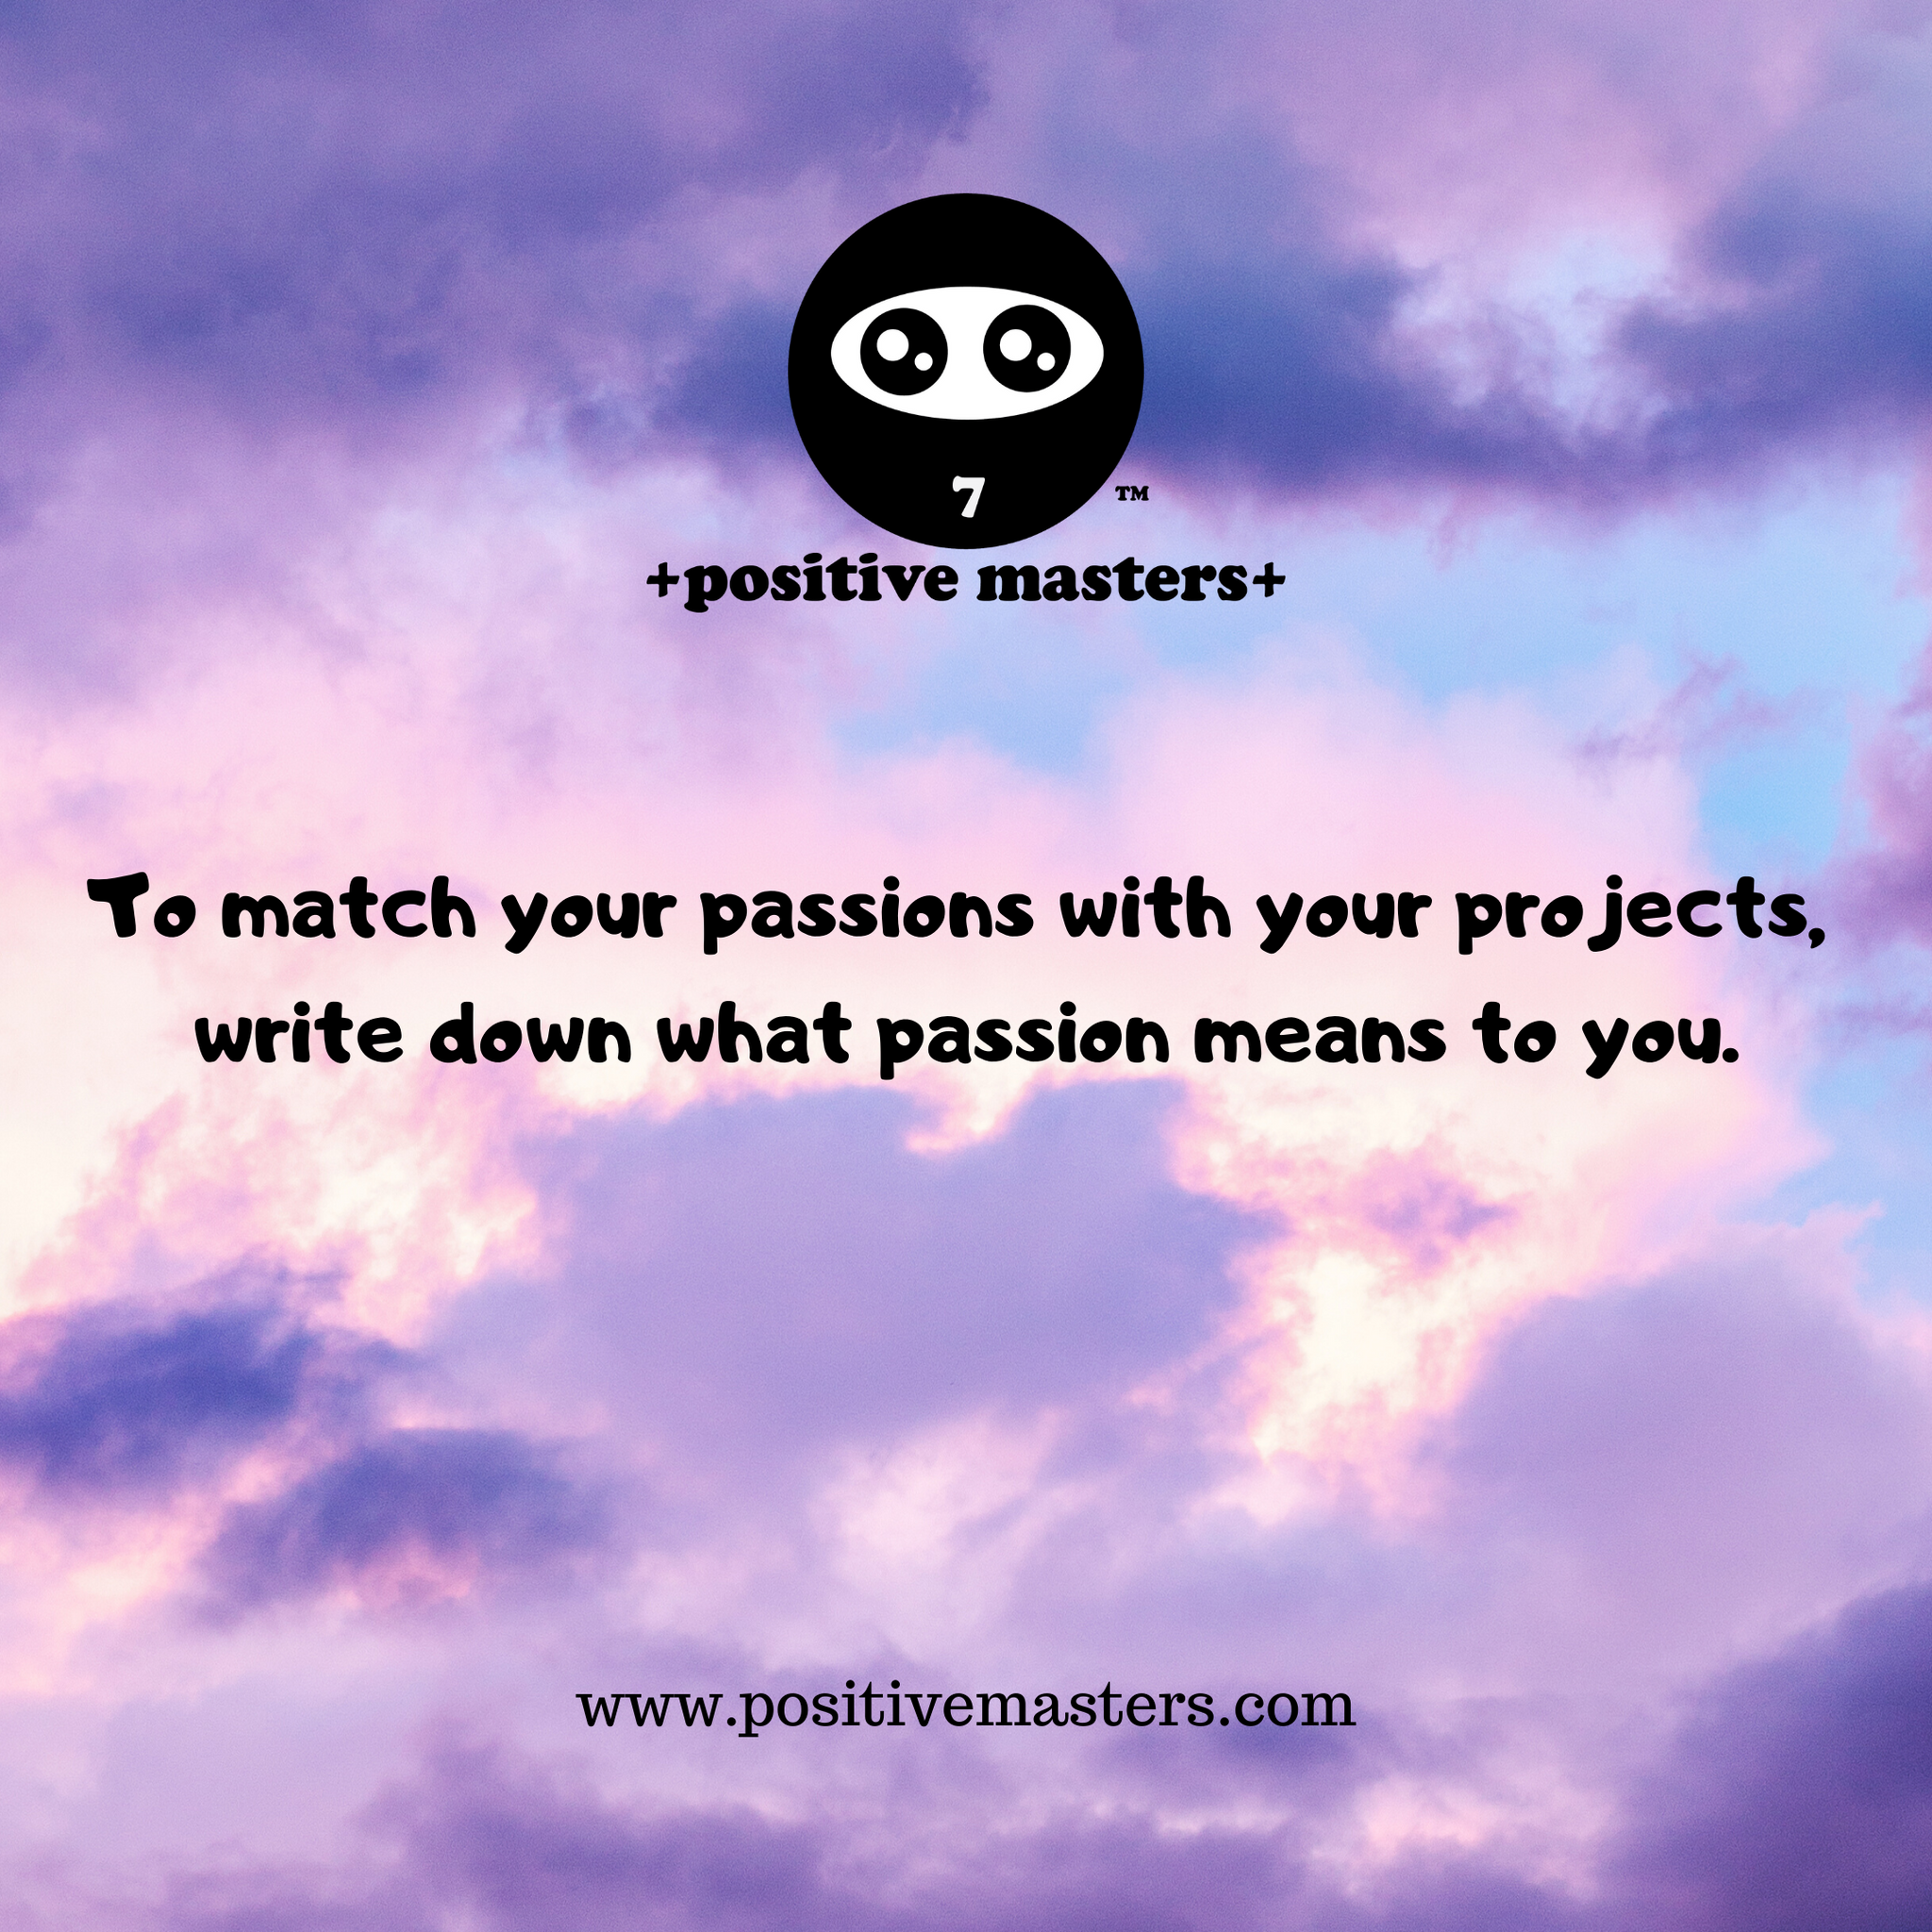 Here's a clip of Episode 4 of the Positive Masters Show Podcast - To match your passions with your projects, write down what passion means to you